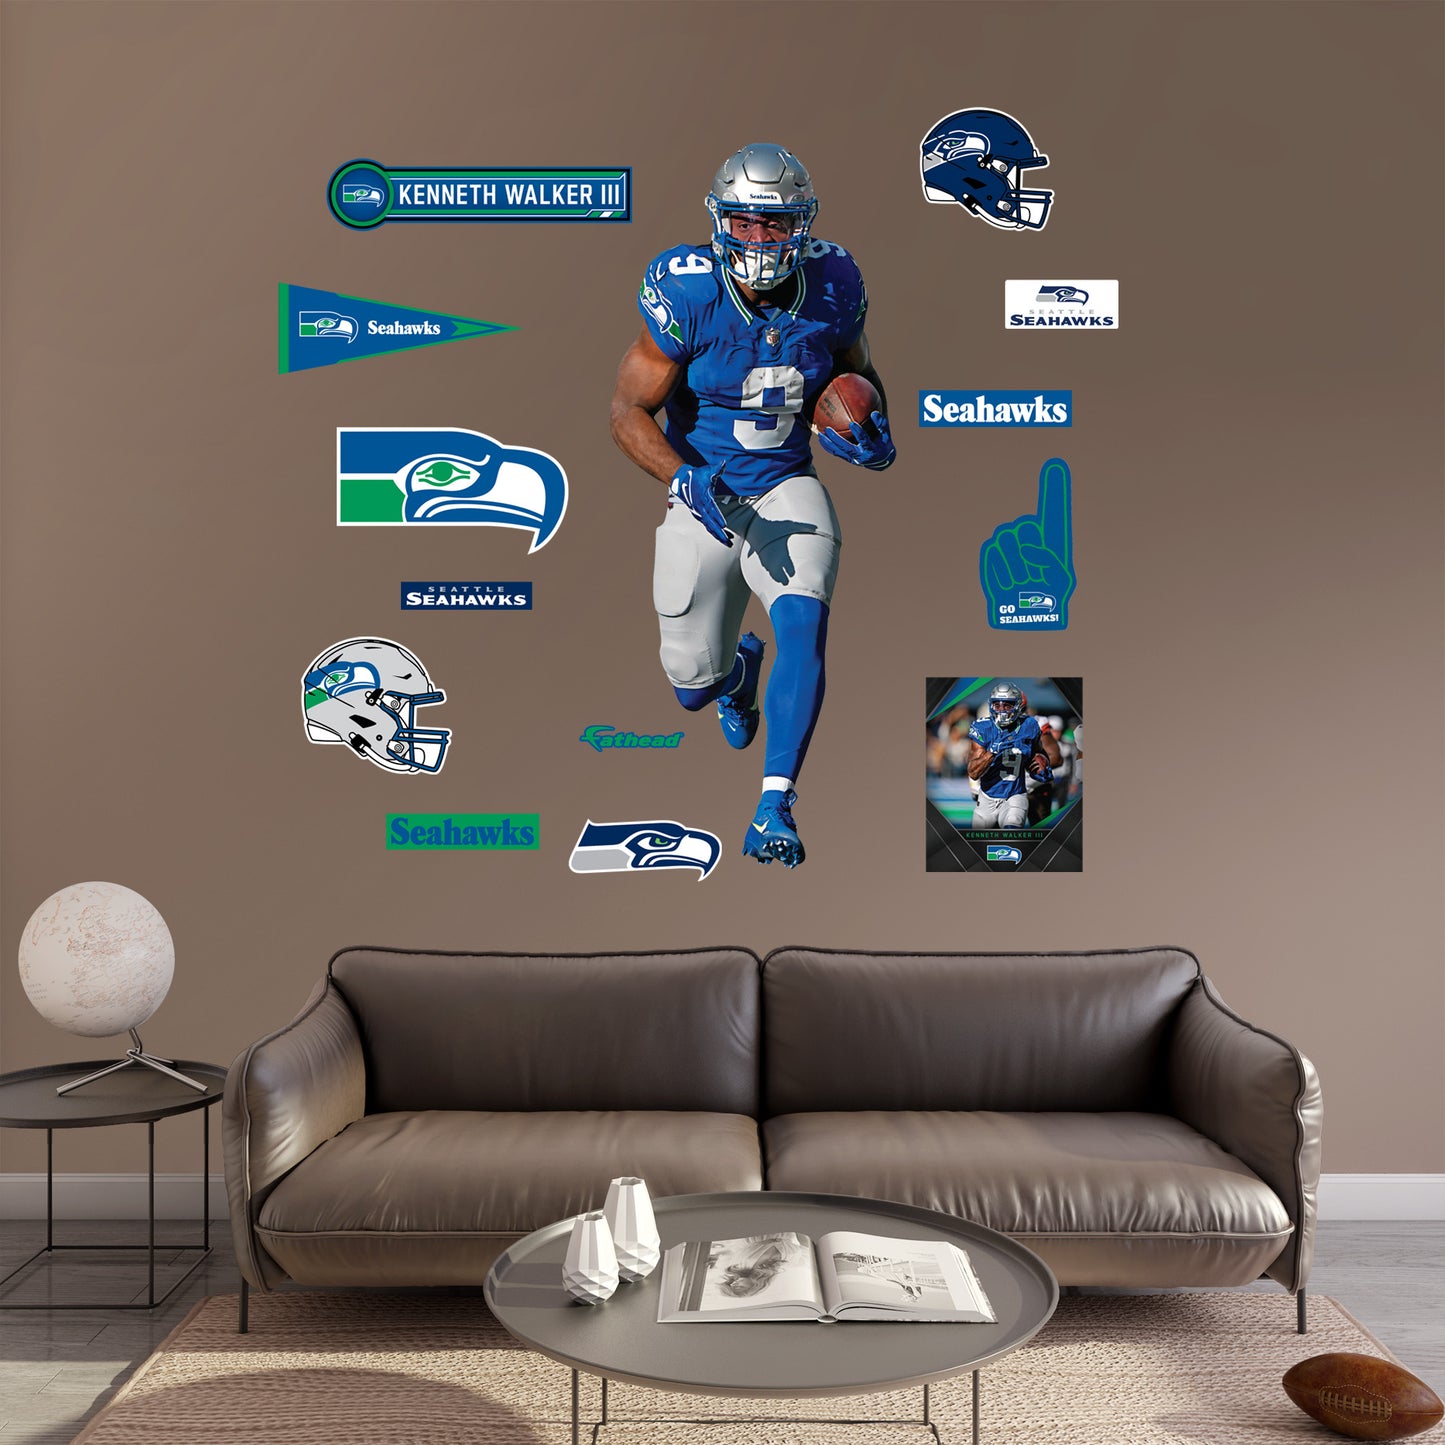 Seattle Seahawks: Kenneth Walker III Throwback        - Officially Licensed NFL Removable     Adhesive Decal